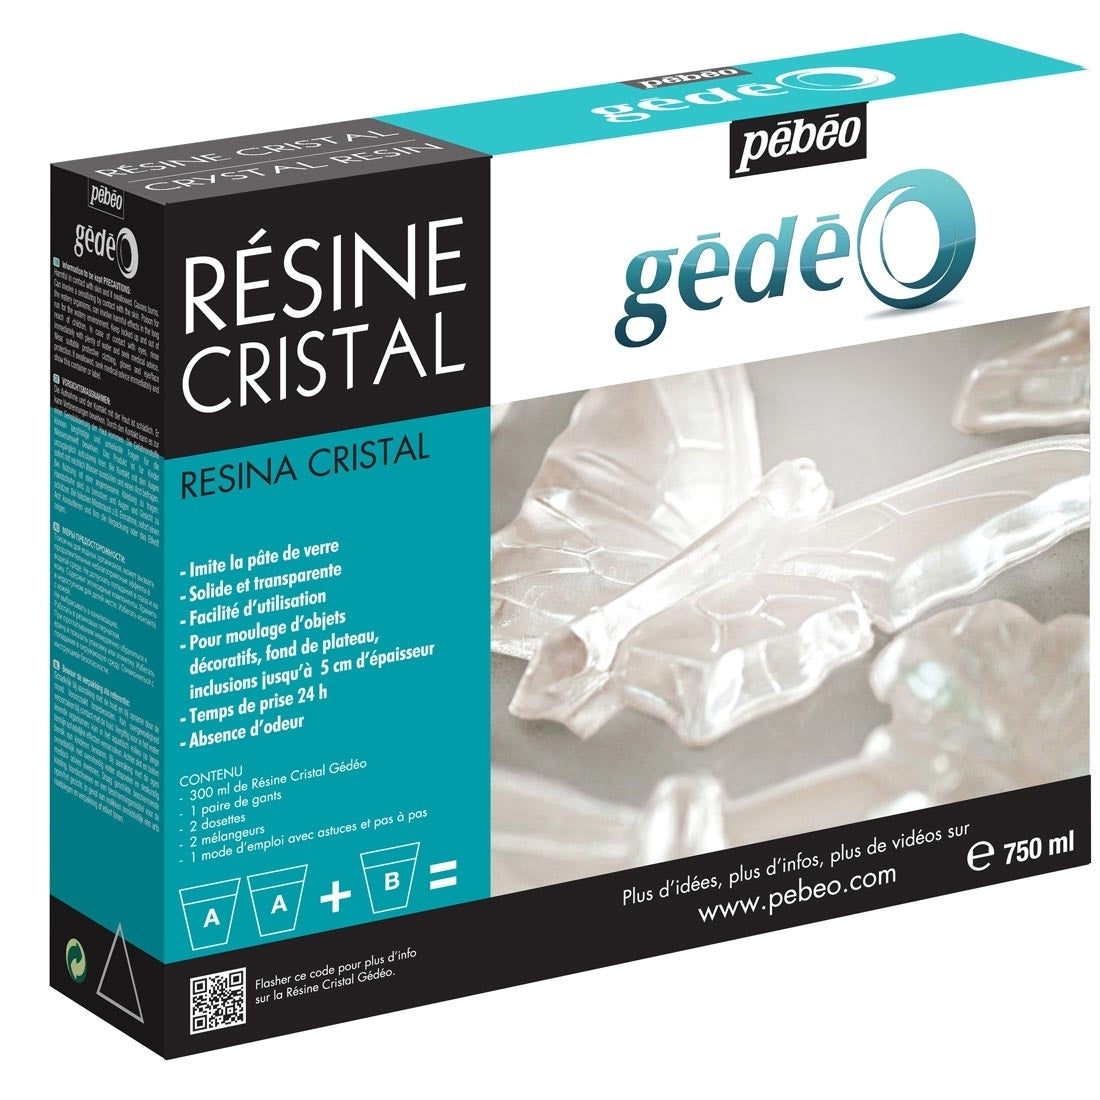 Pebeo - Gedeo - Moulding and Casting - Kit Crystal Resin - 750Ml